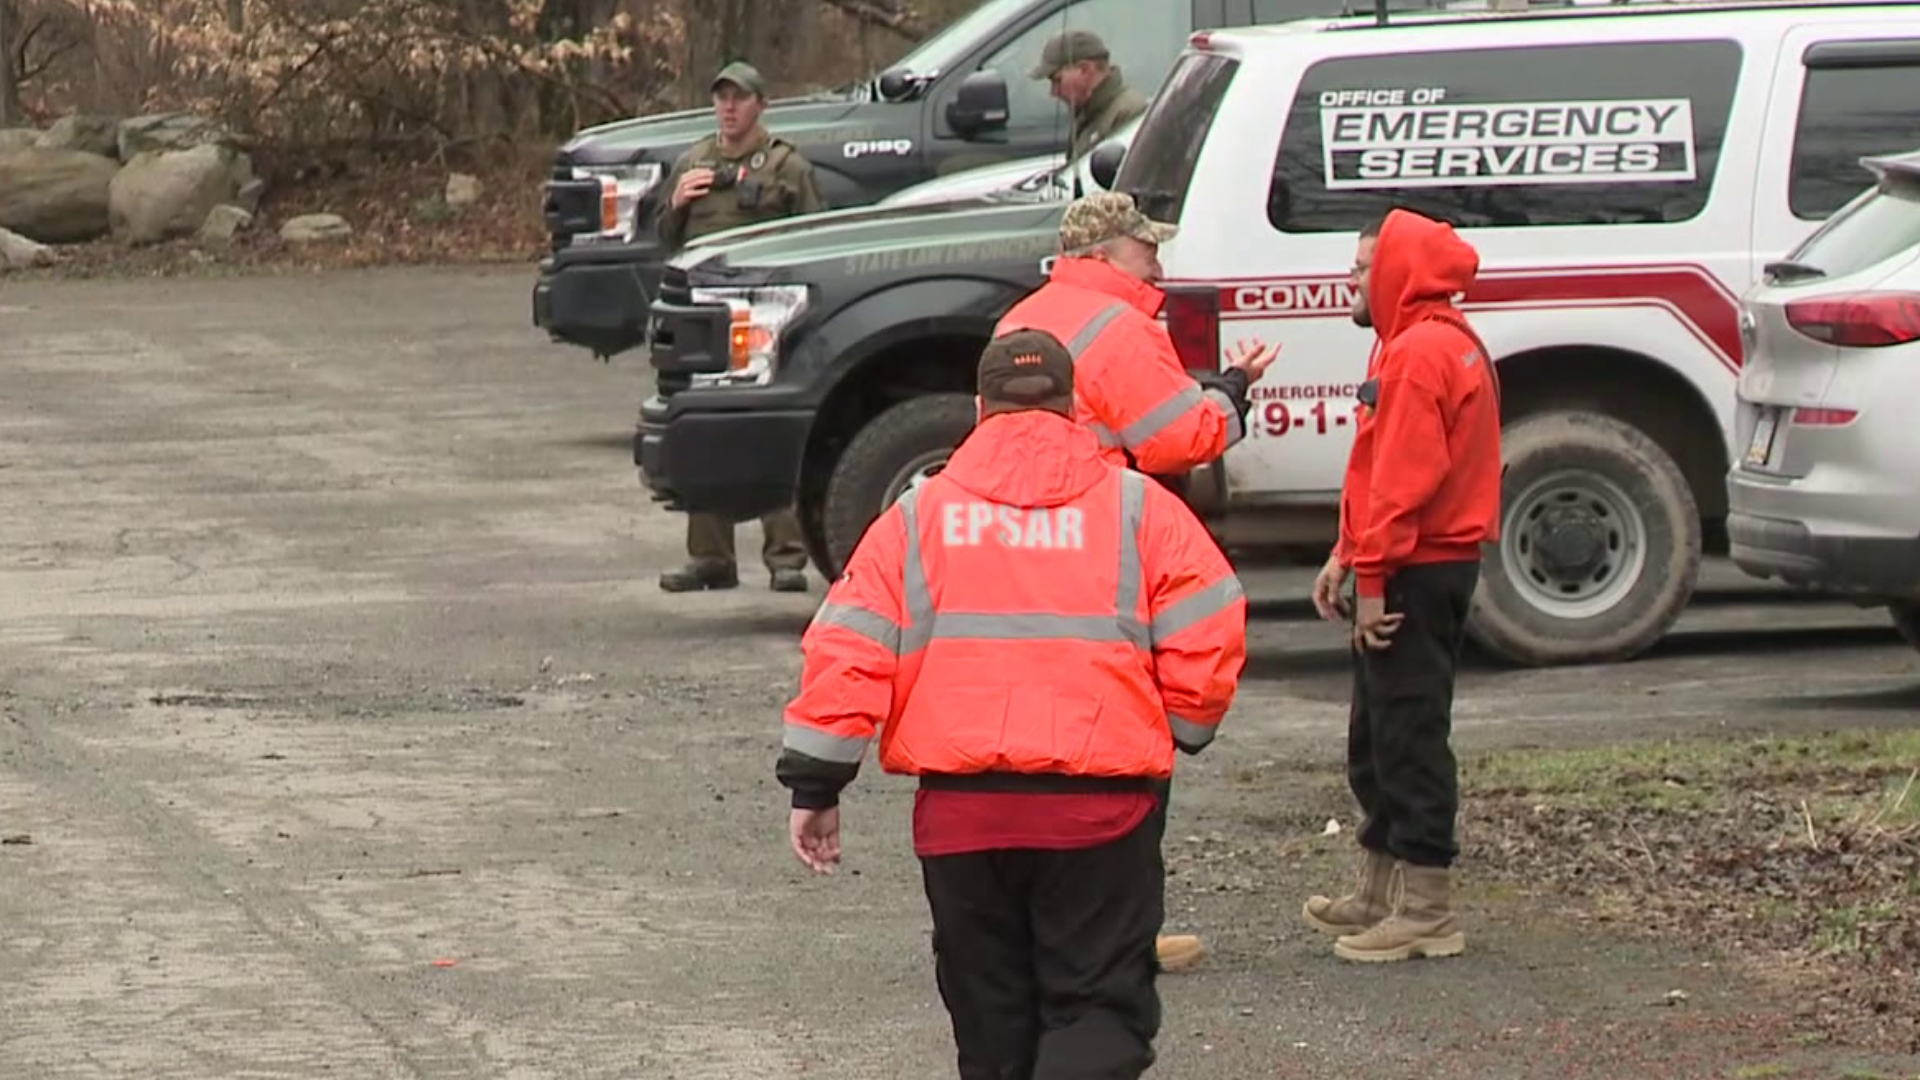 Monday marks the third day crews have searched for a missing Lackawanna County man at Bradys Lake.